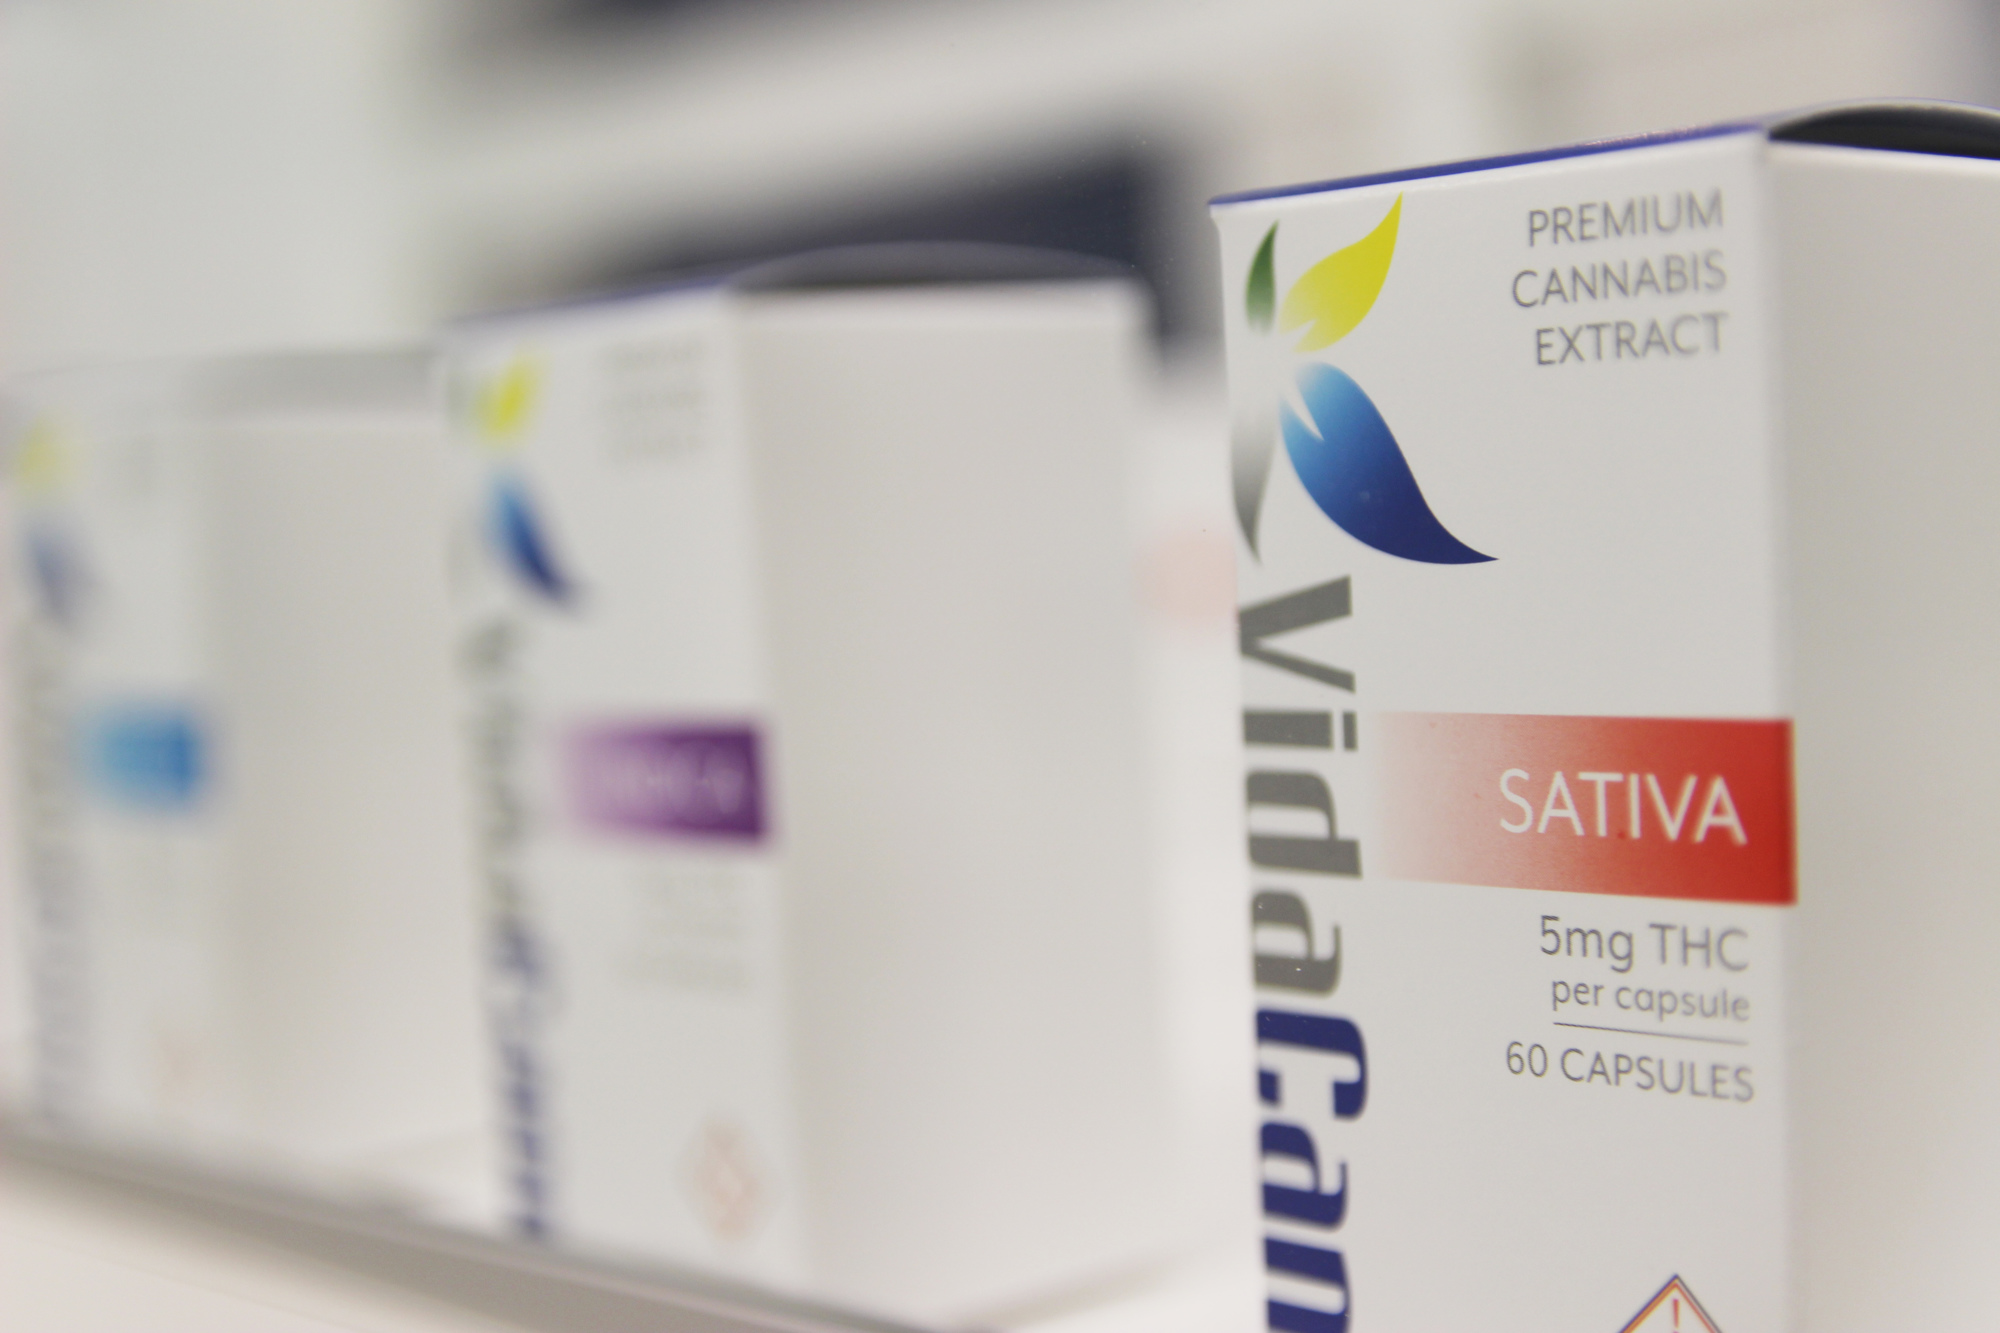 VidaCann carries two different medical cannabis products: tinctures and capsules.